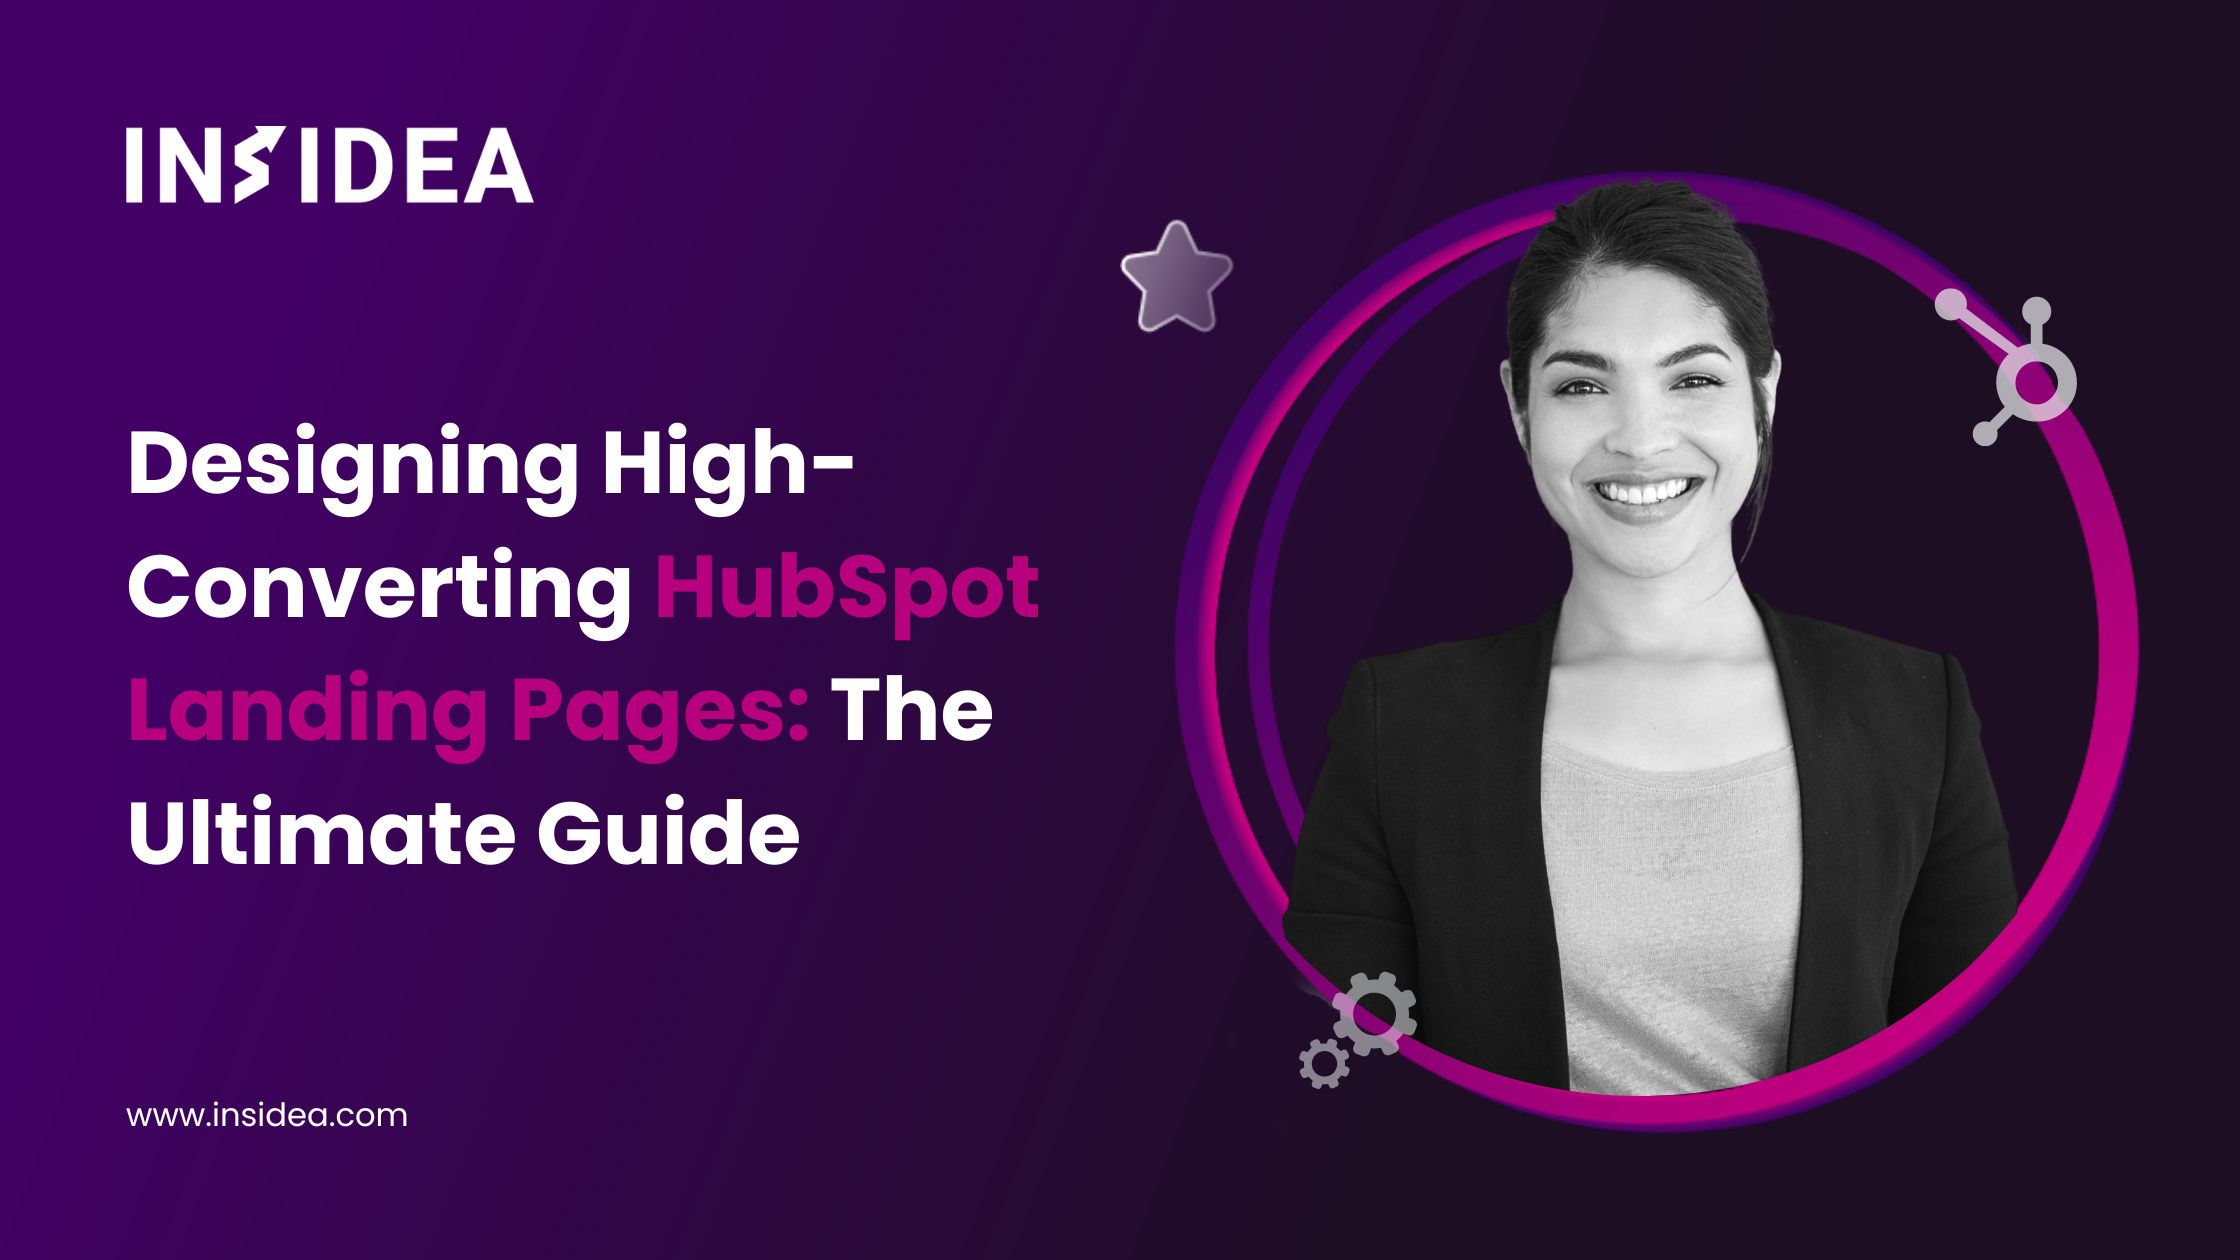 Designing High-Converting HubSpot Landing Pages The Ultimate Guide